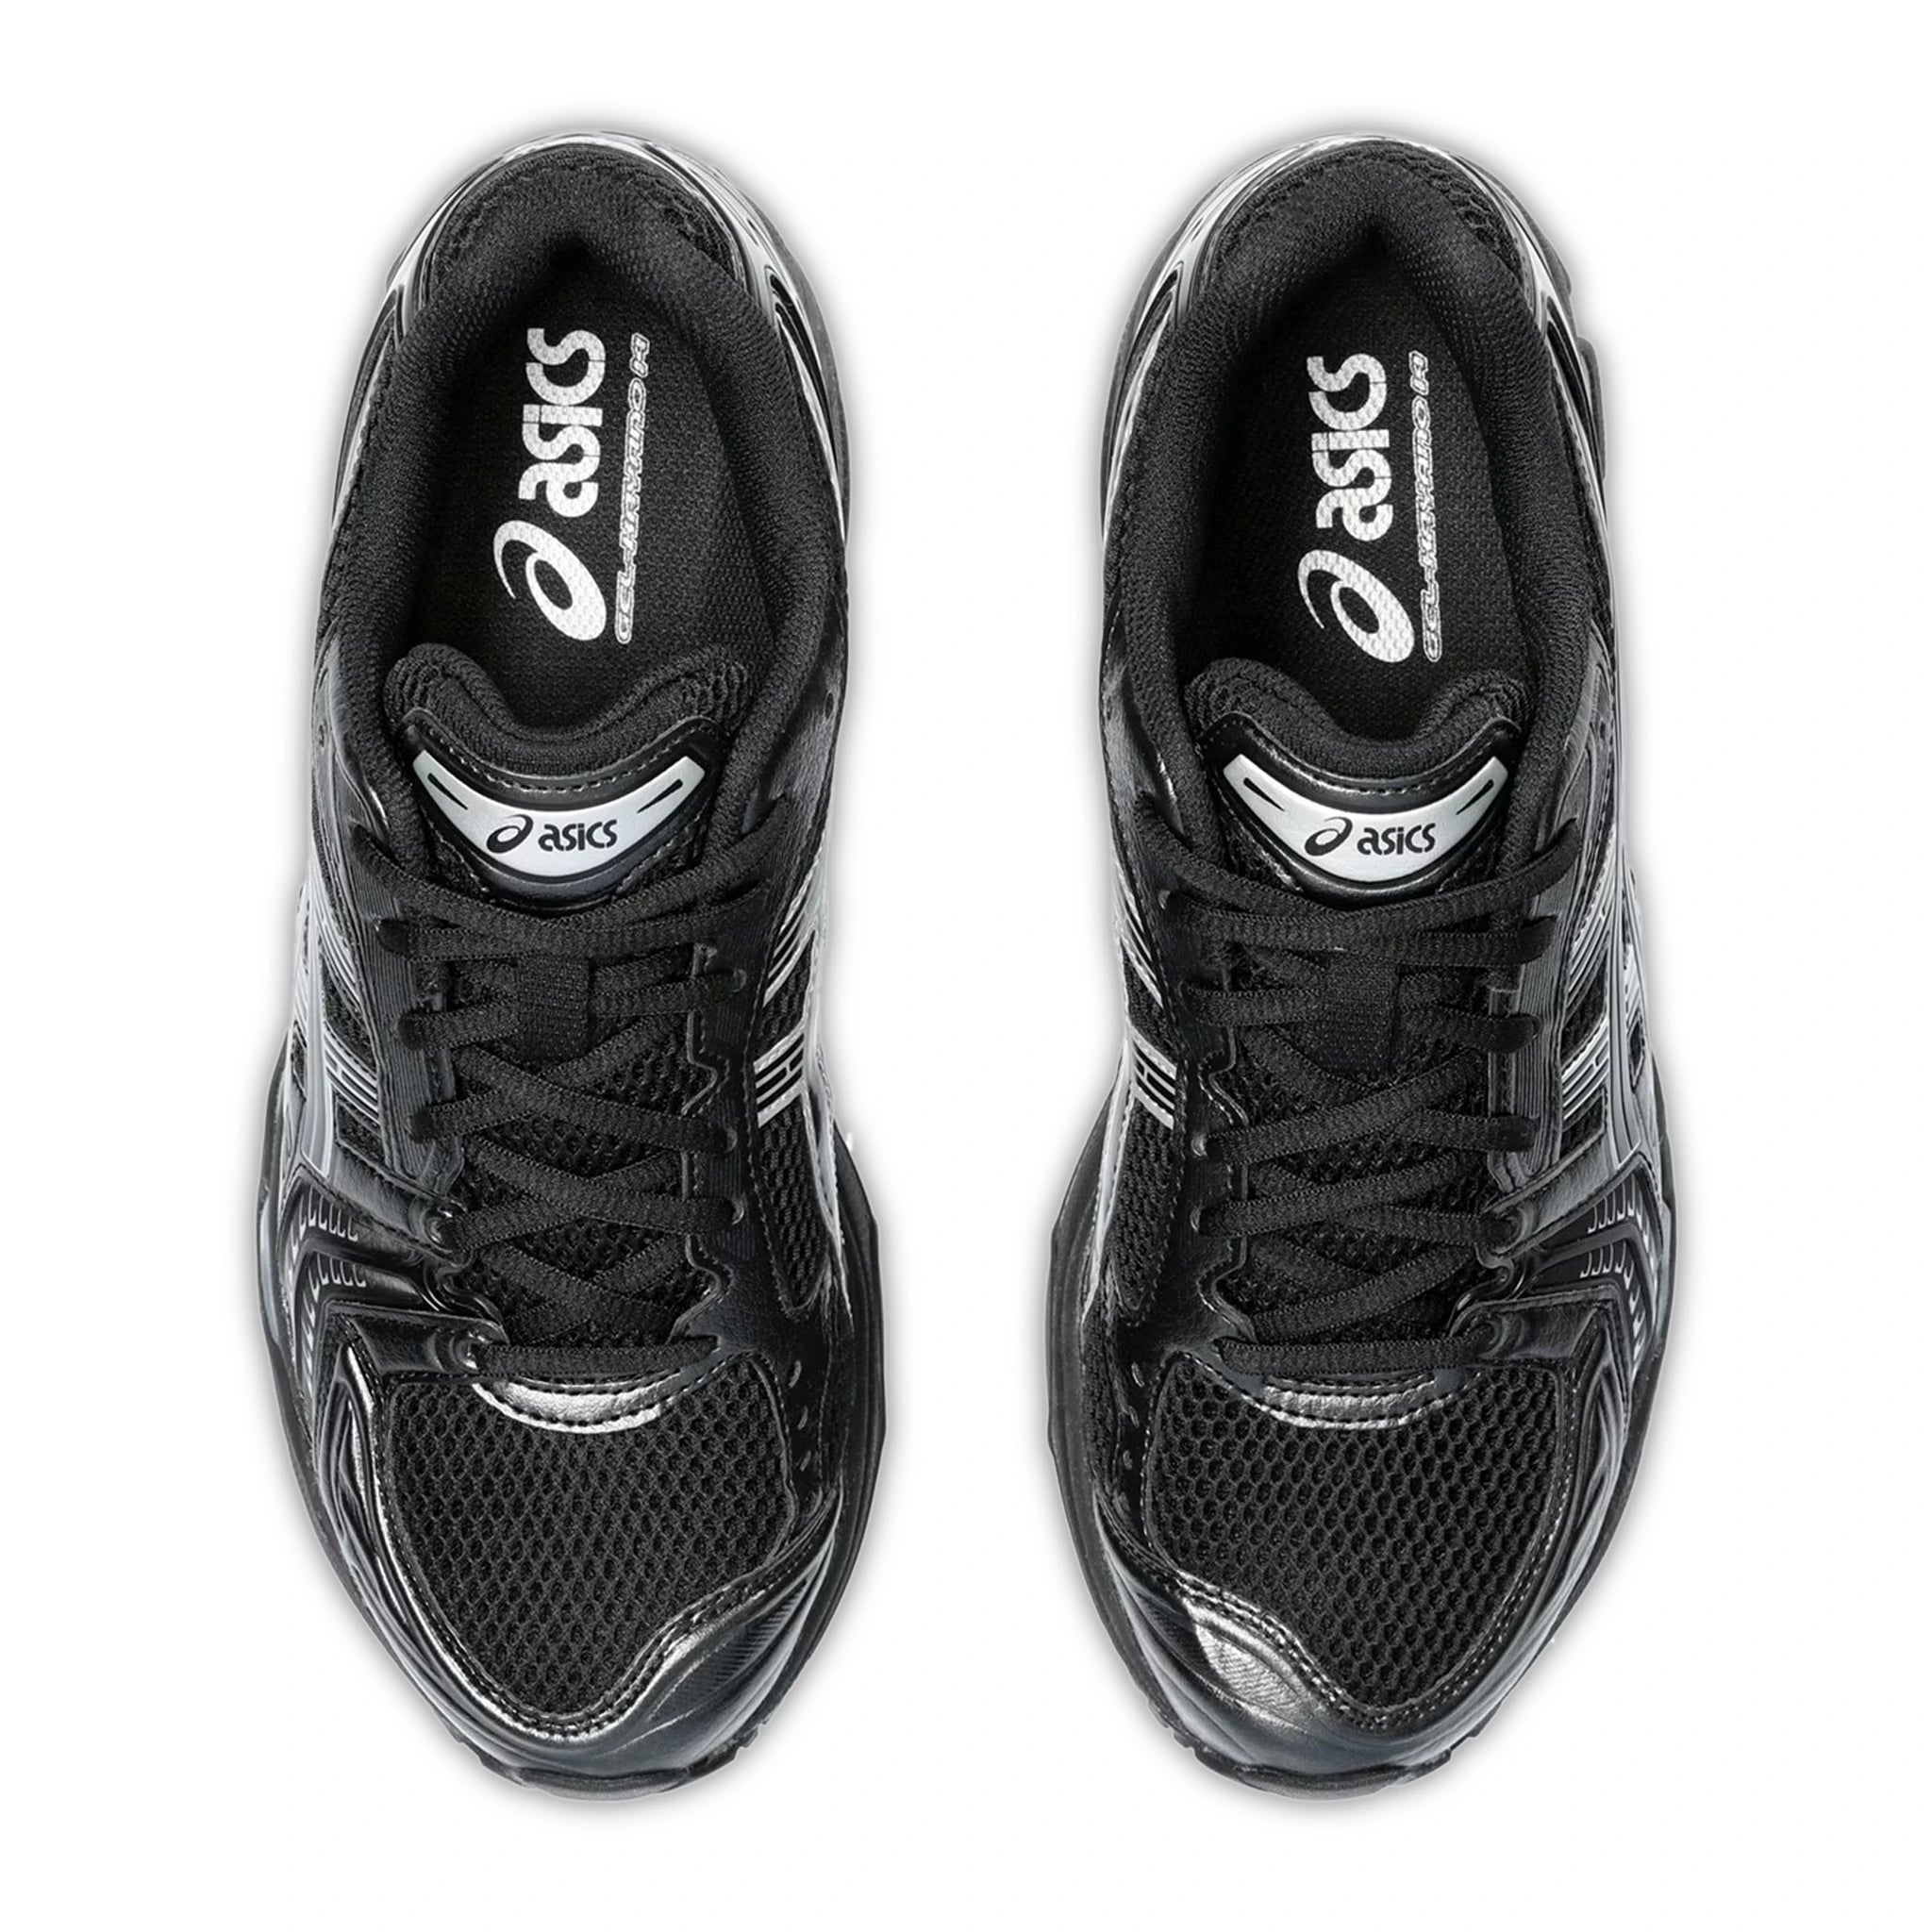 Top view of ASICS Gel-Kayano 14 Black Silver 1201A019-006